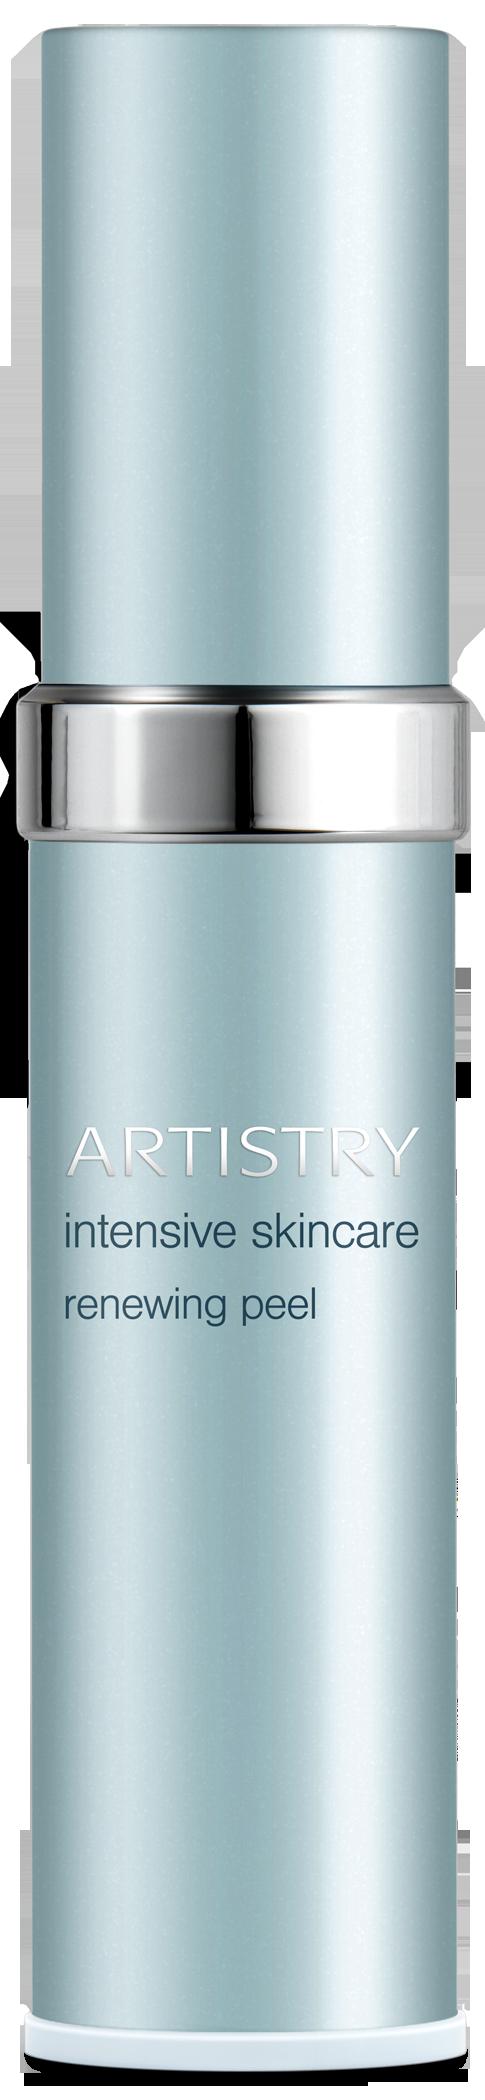 PRODUCT SALES GUIDE ARTISTRY Intensive Skincare Renewing Peel The ARTISTRY Intensive Skincare Renewing Peel provides the benefits of a professional peel in the comfort of your own home.